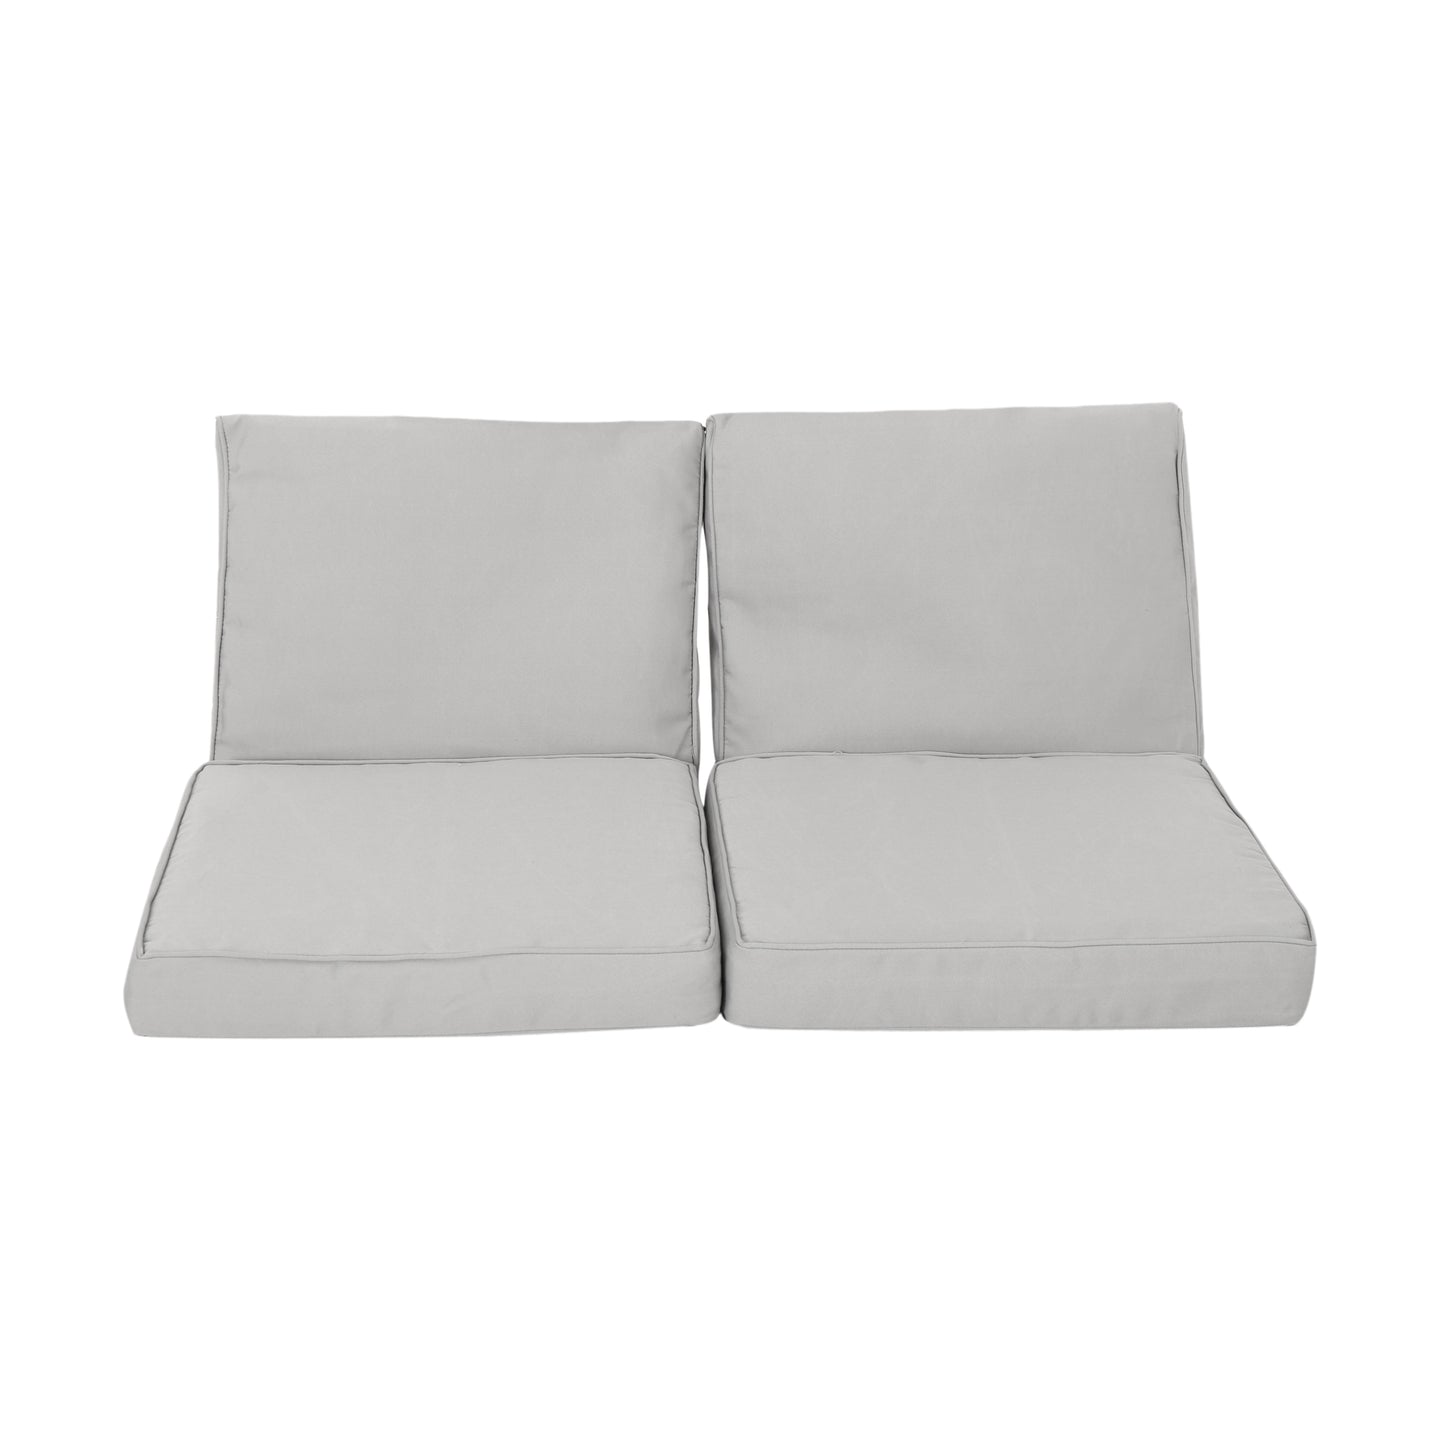 Atiyah Outdoor Water Resistant Fabric Loveseat Cushions with Piping